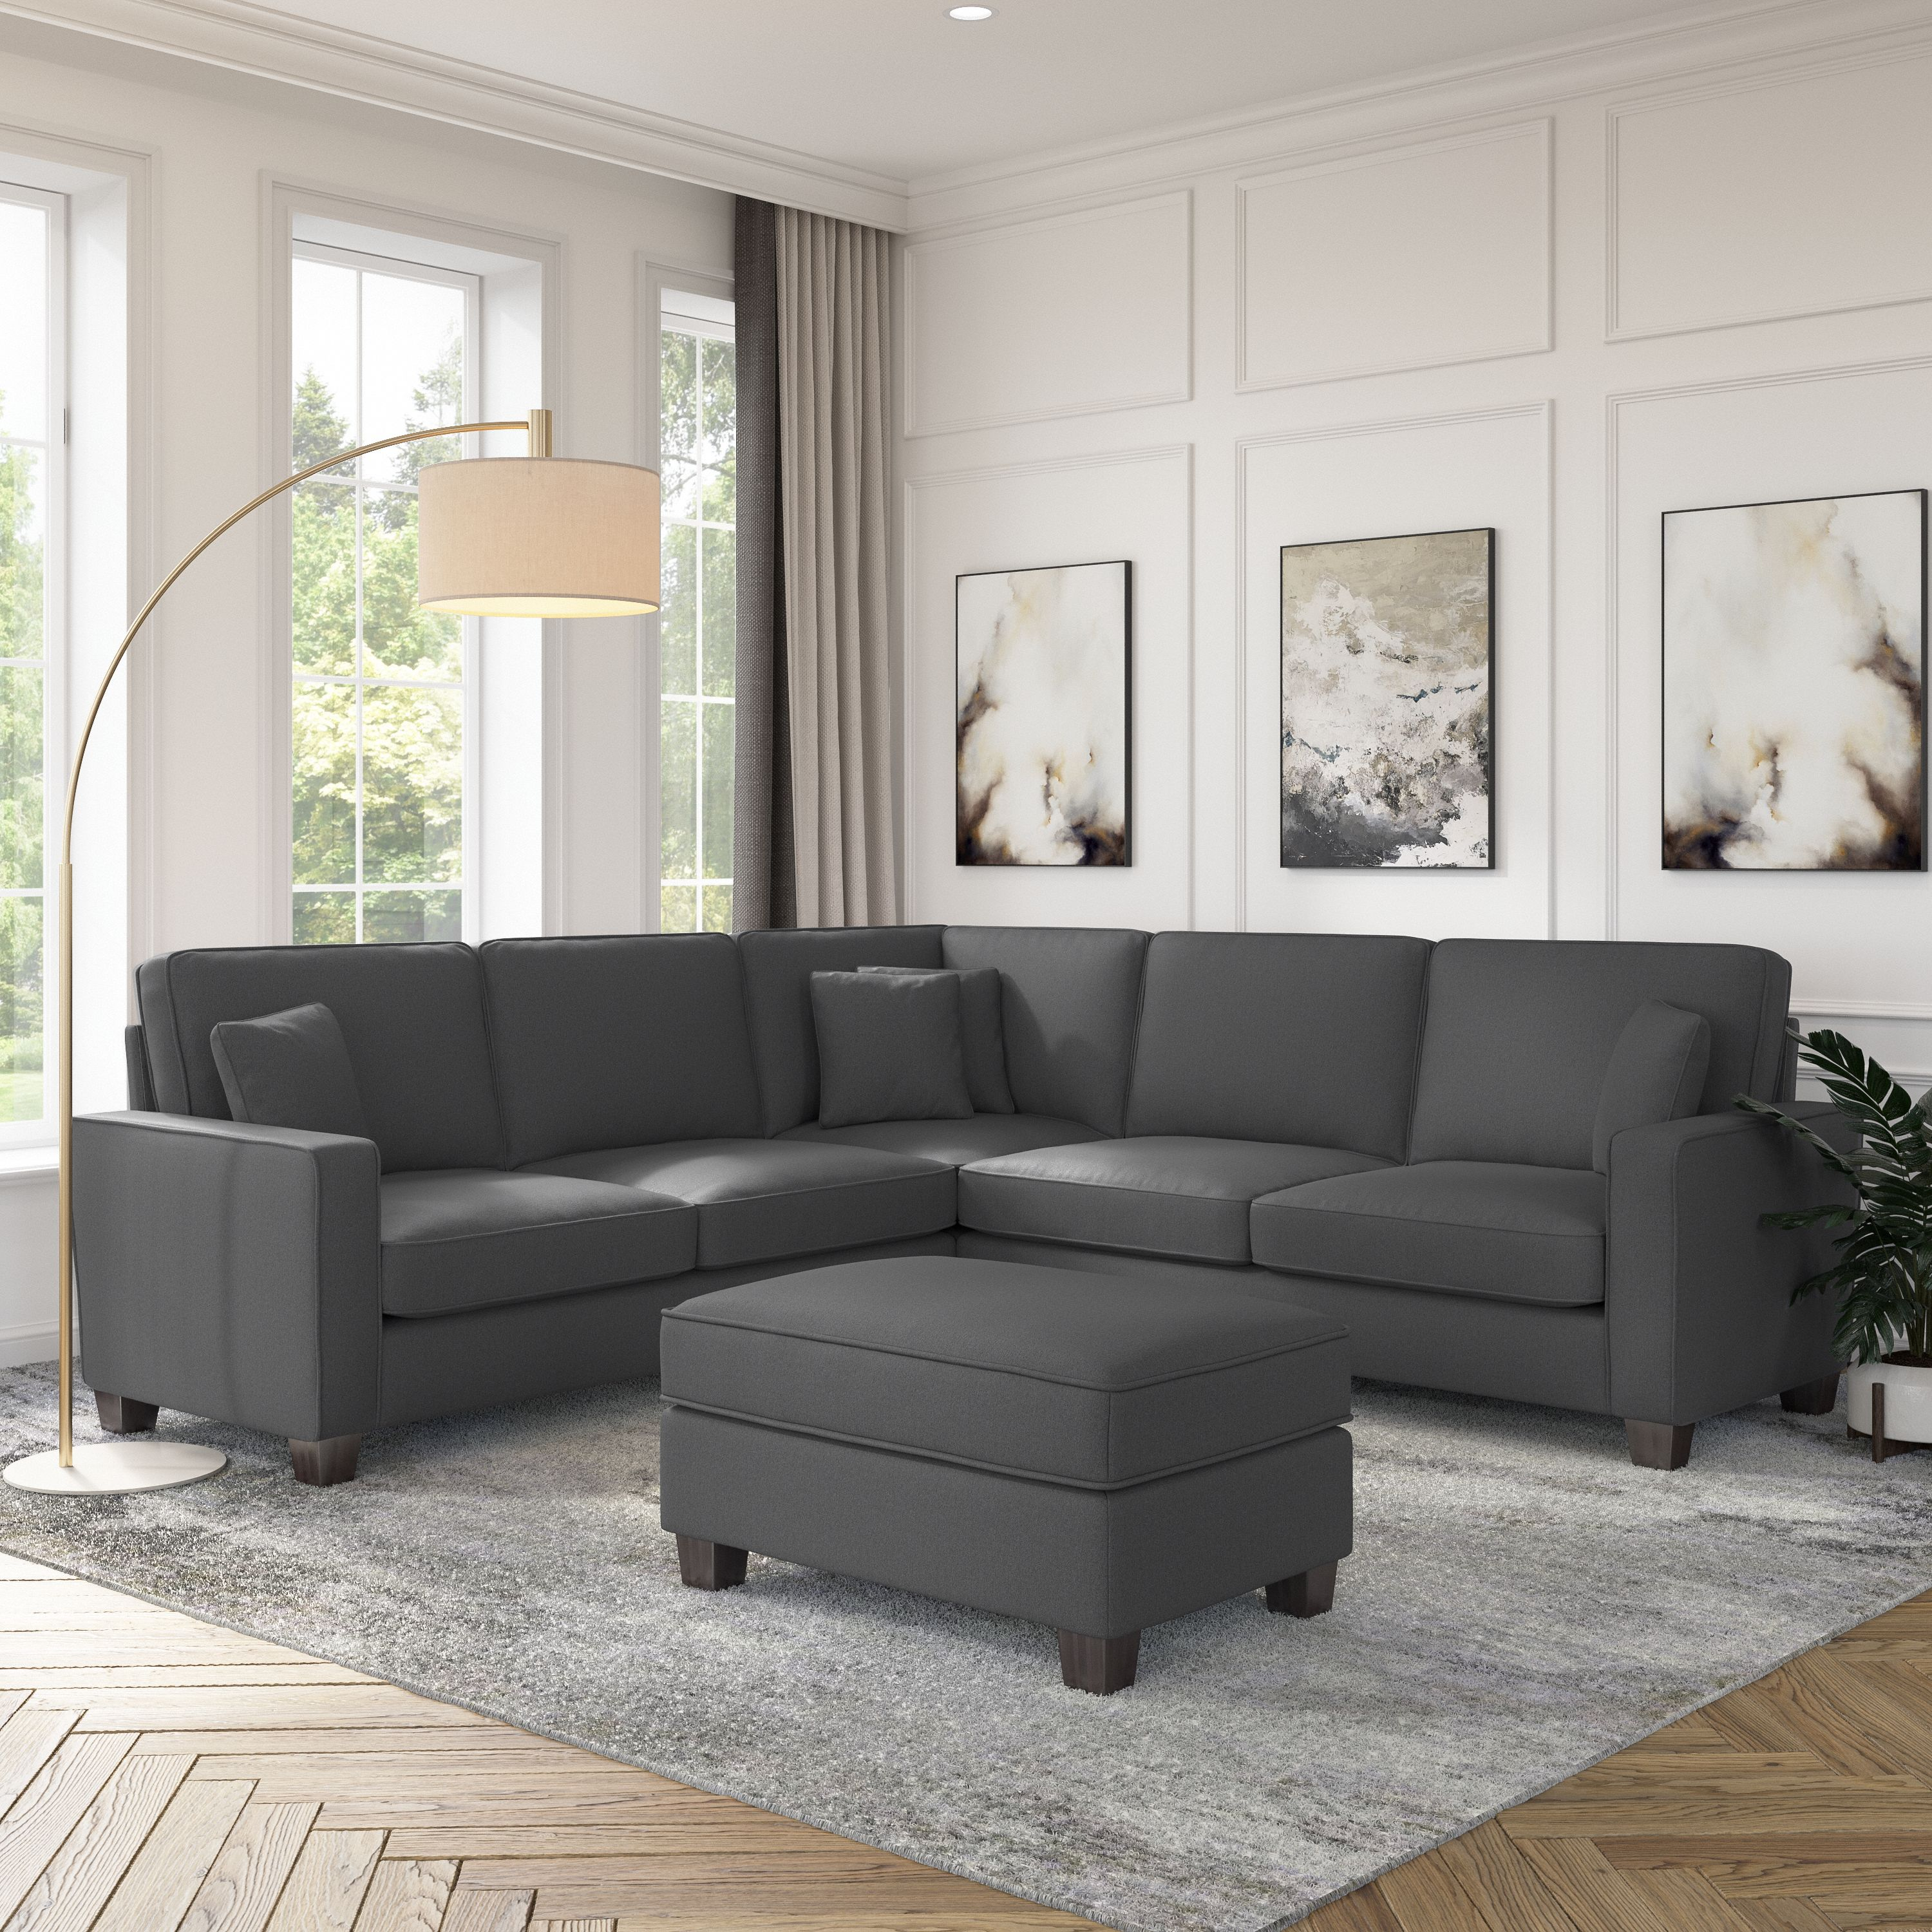 Shop Bush Furniture Stockton 99W L Shaped Sectional Couch with Ottoman 01 SKT003CGH #color_charcoal gray herringbone fabr